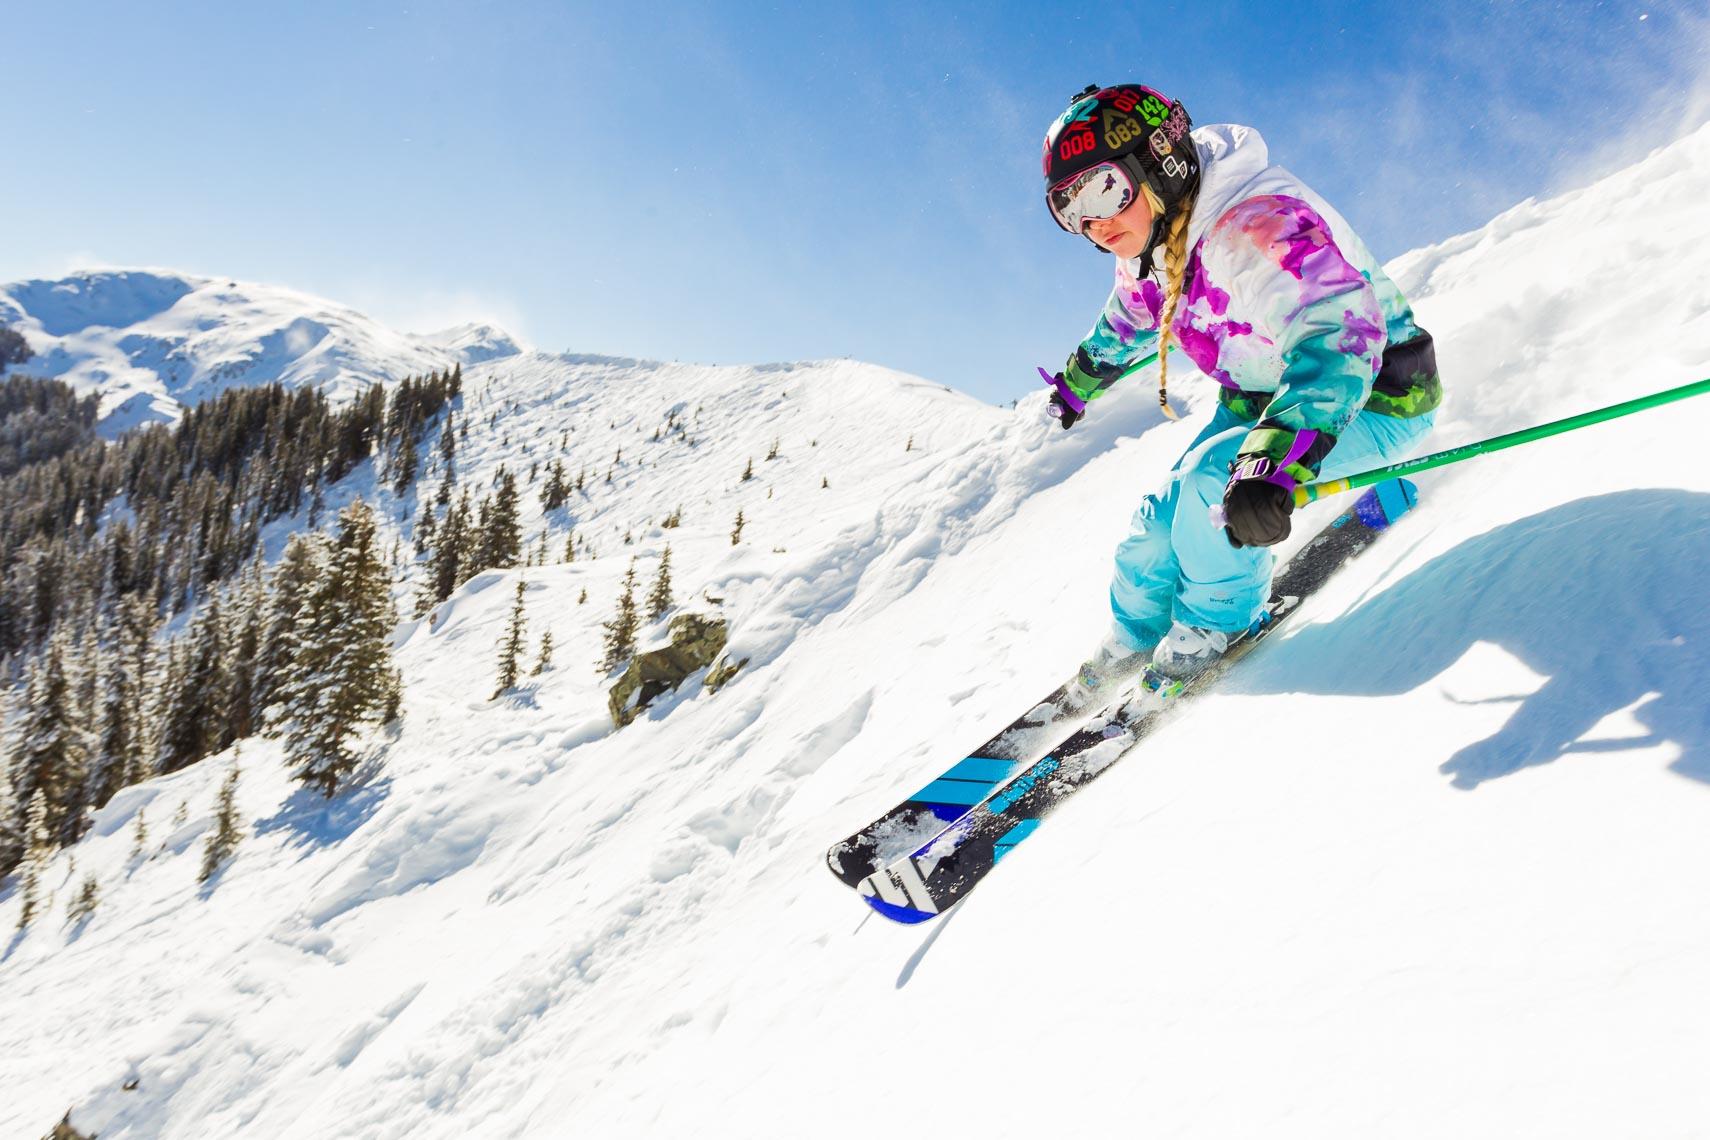 Young Expert Skier Taos Ski Valley | Michael DeYoung Photographer